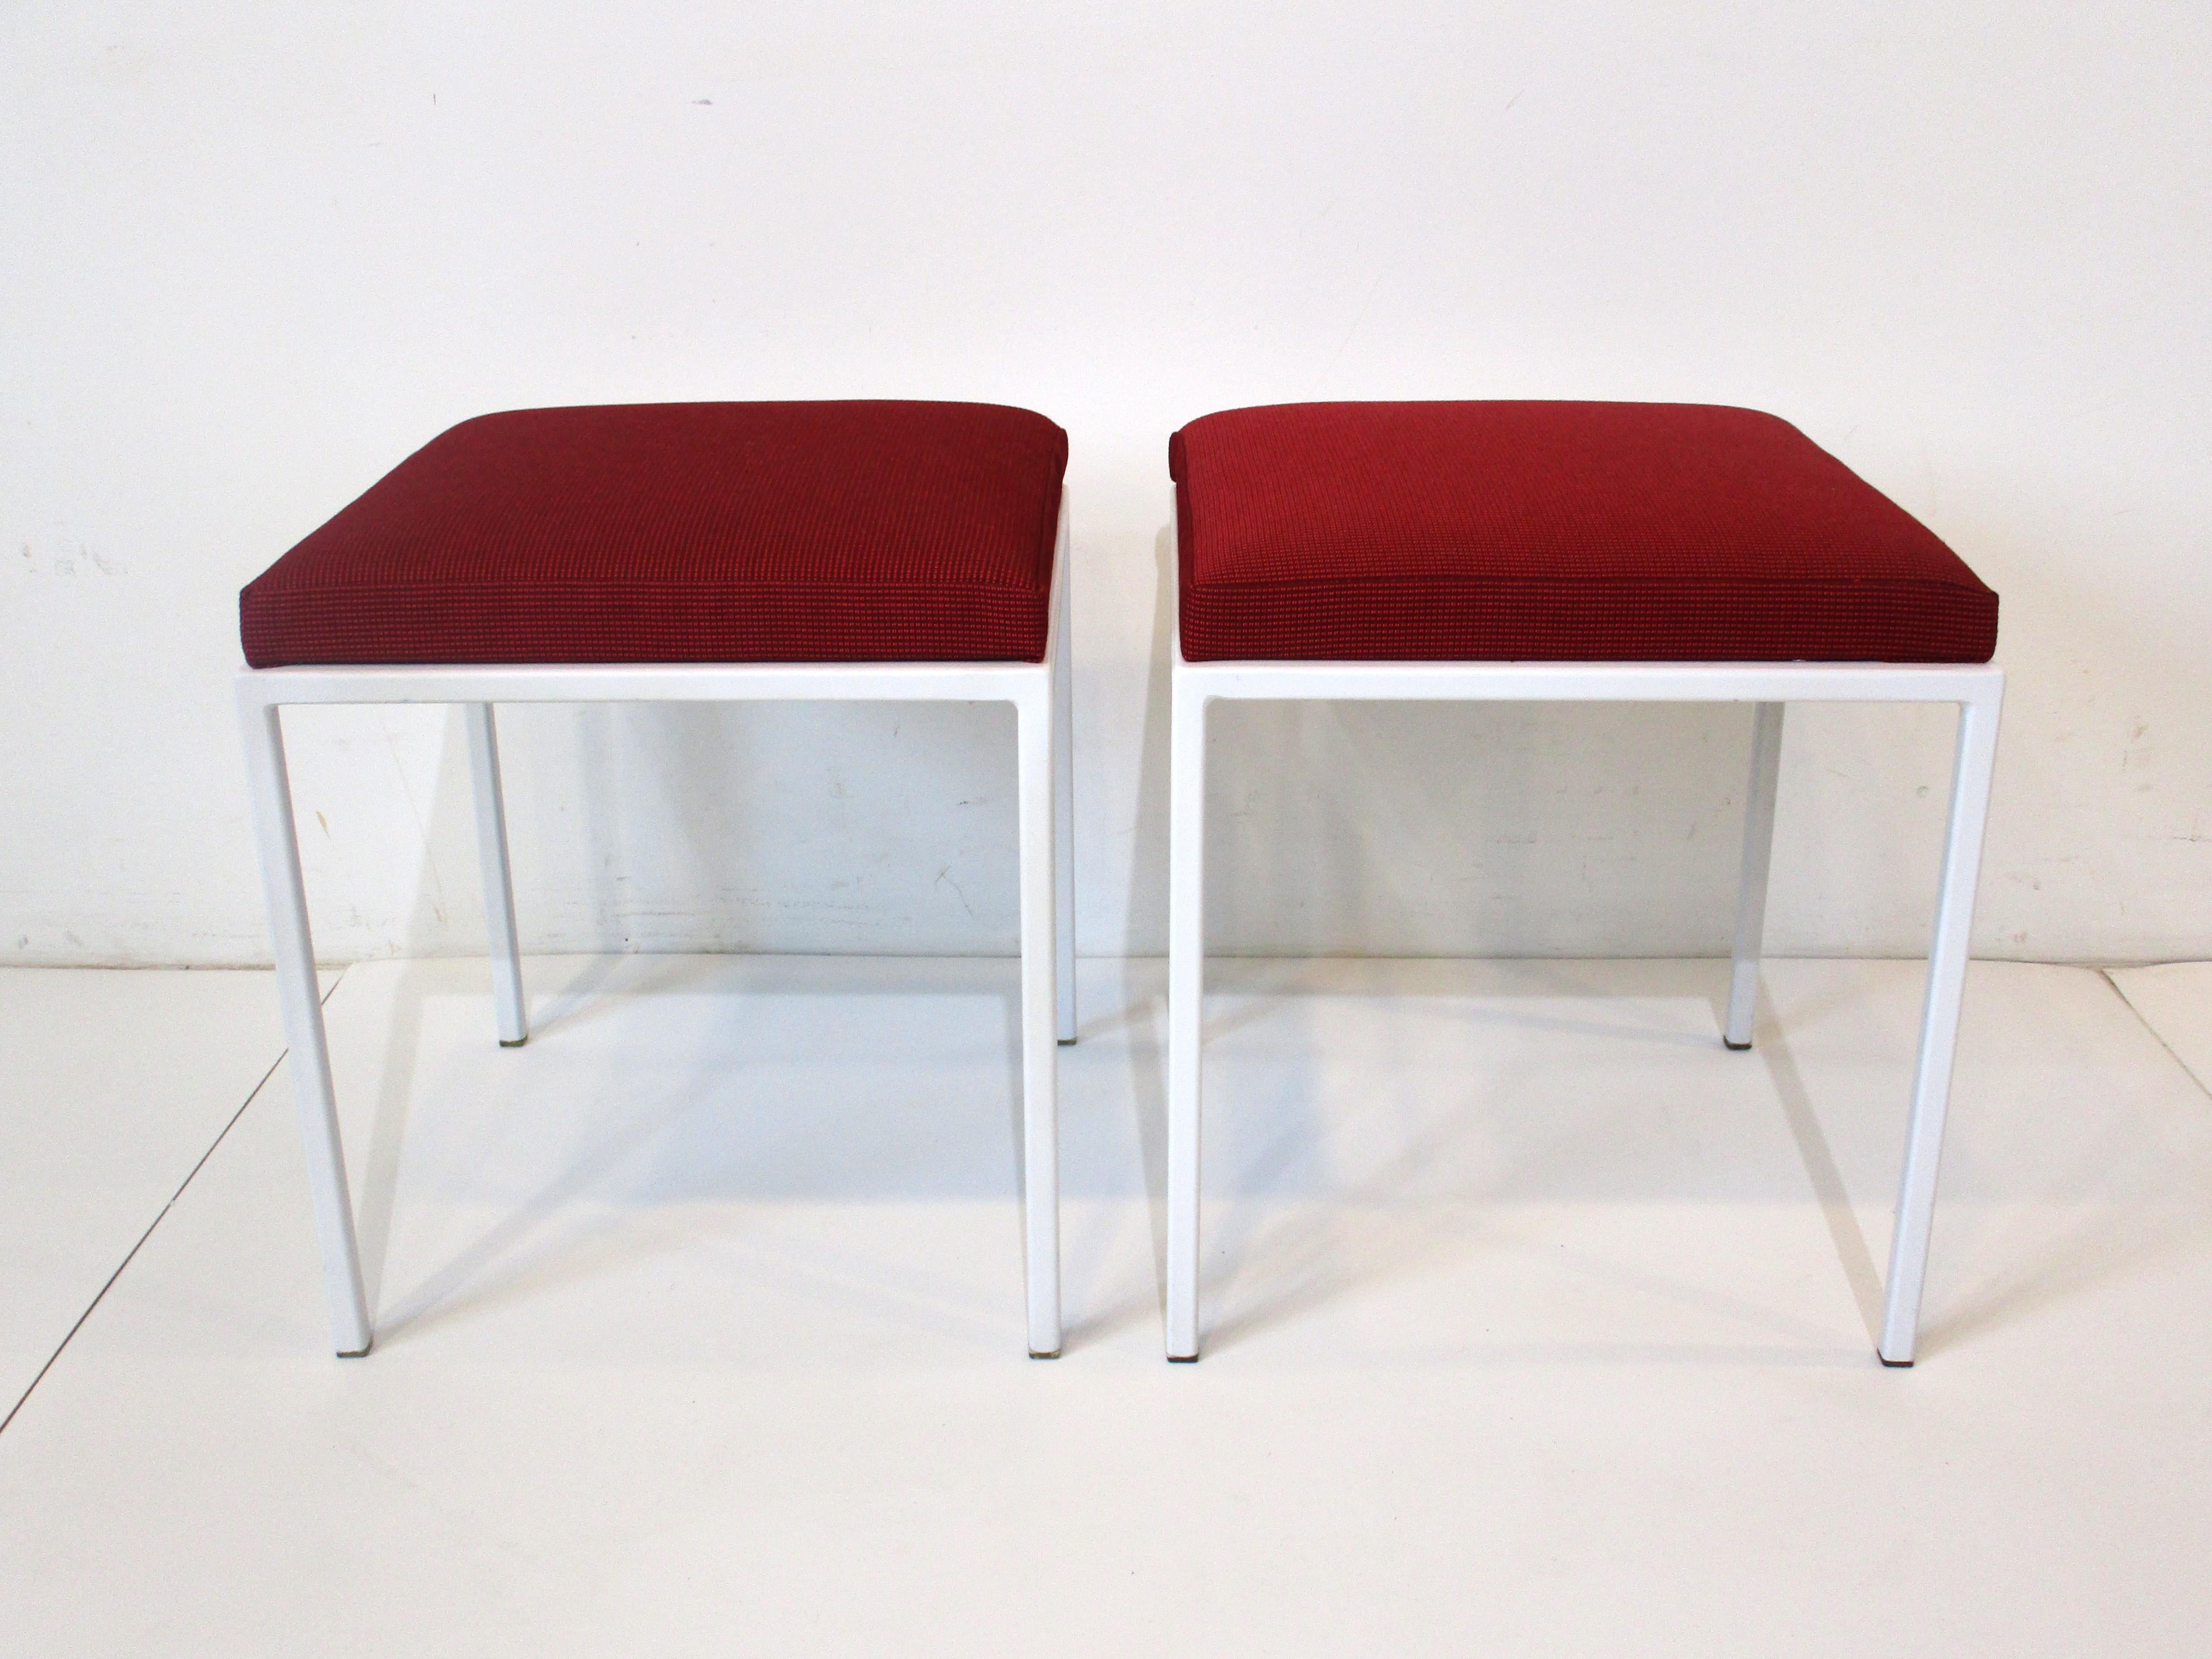 A pair of smaller sized midcentury steel framed stools in satin white with clear plastic foot pads to protect your floors . Upholstered in a dark red pattered farbic from Knoll with nice cushioning designed by D.R. Bates and Jackson Gregory Jr for